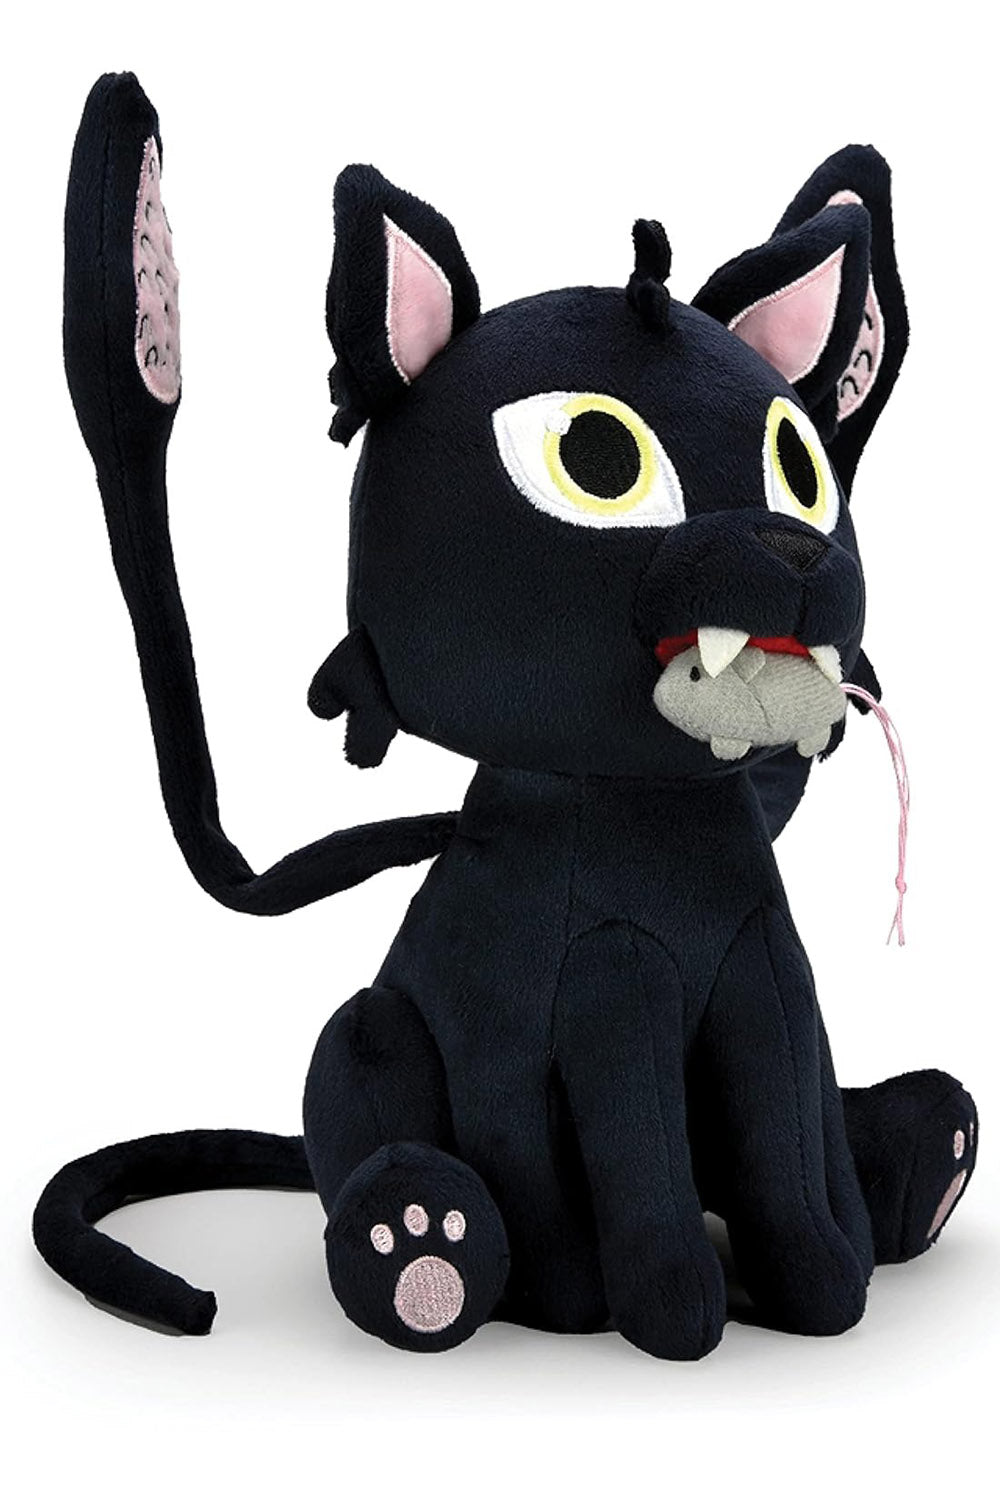 D and D tentacle cat plush